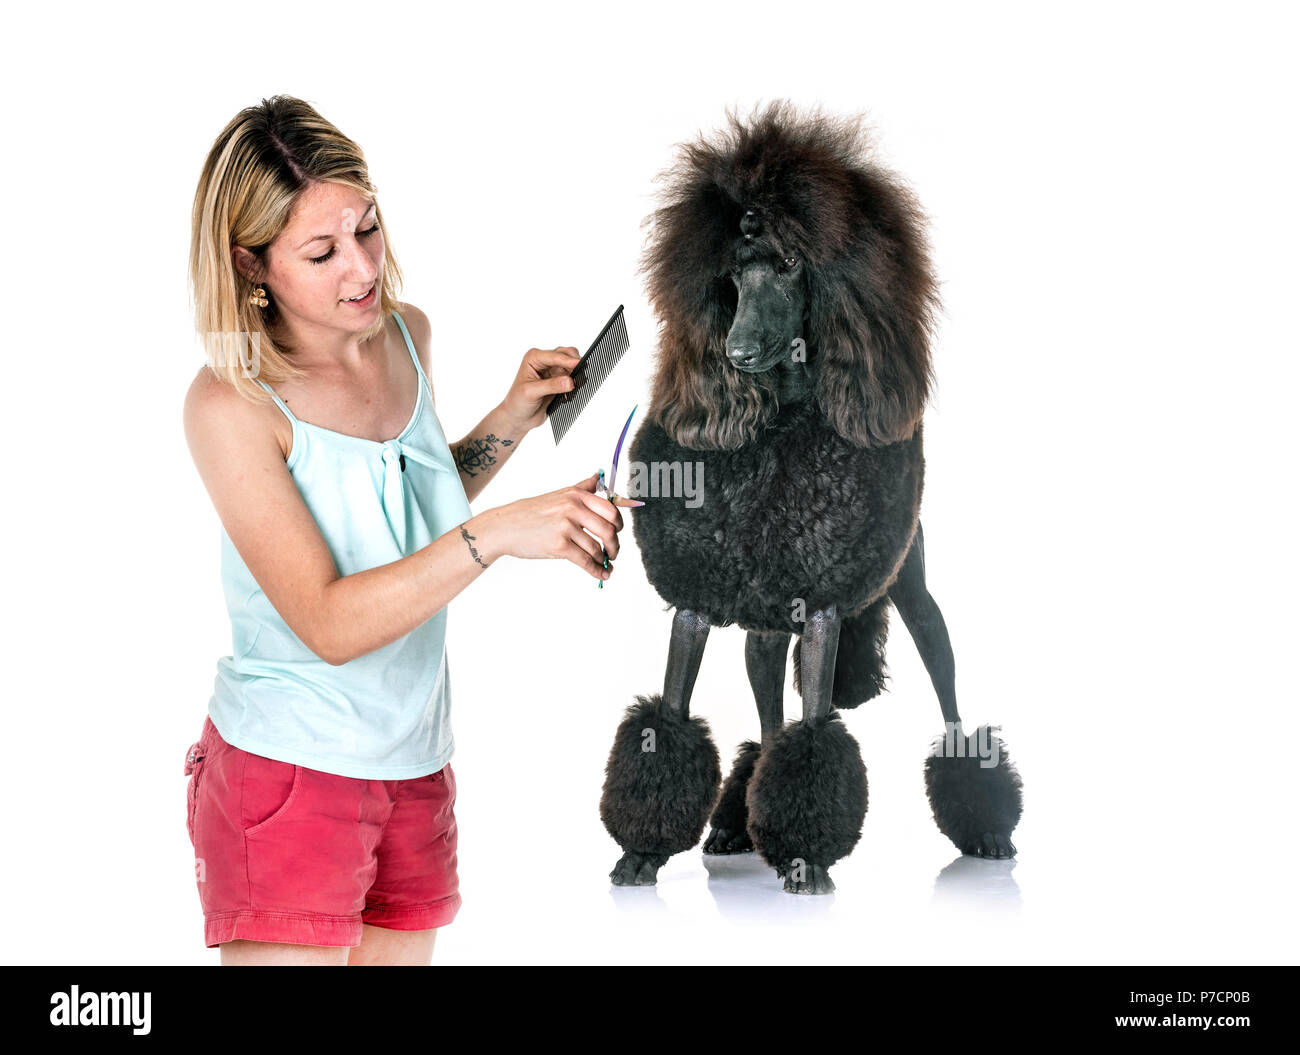 black standard poodle and woman in front of white background Stock Photo